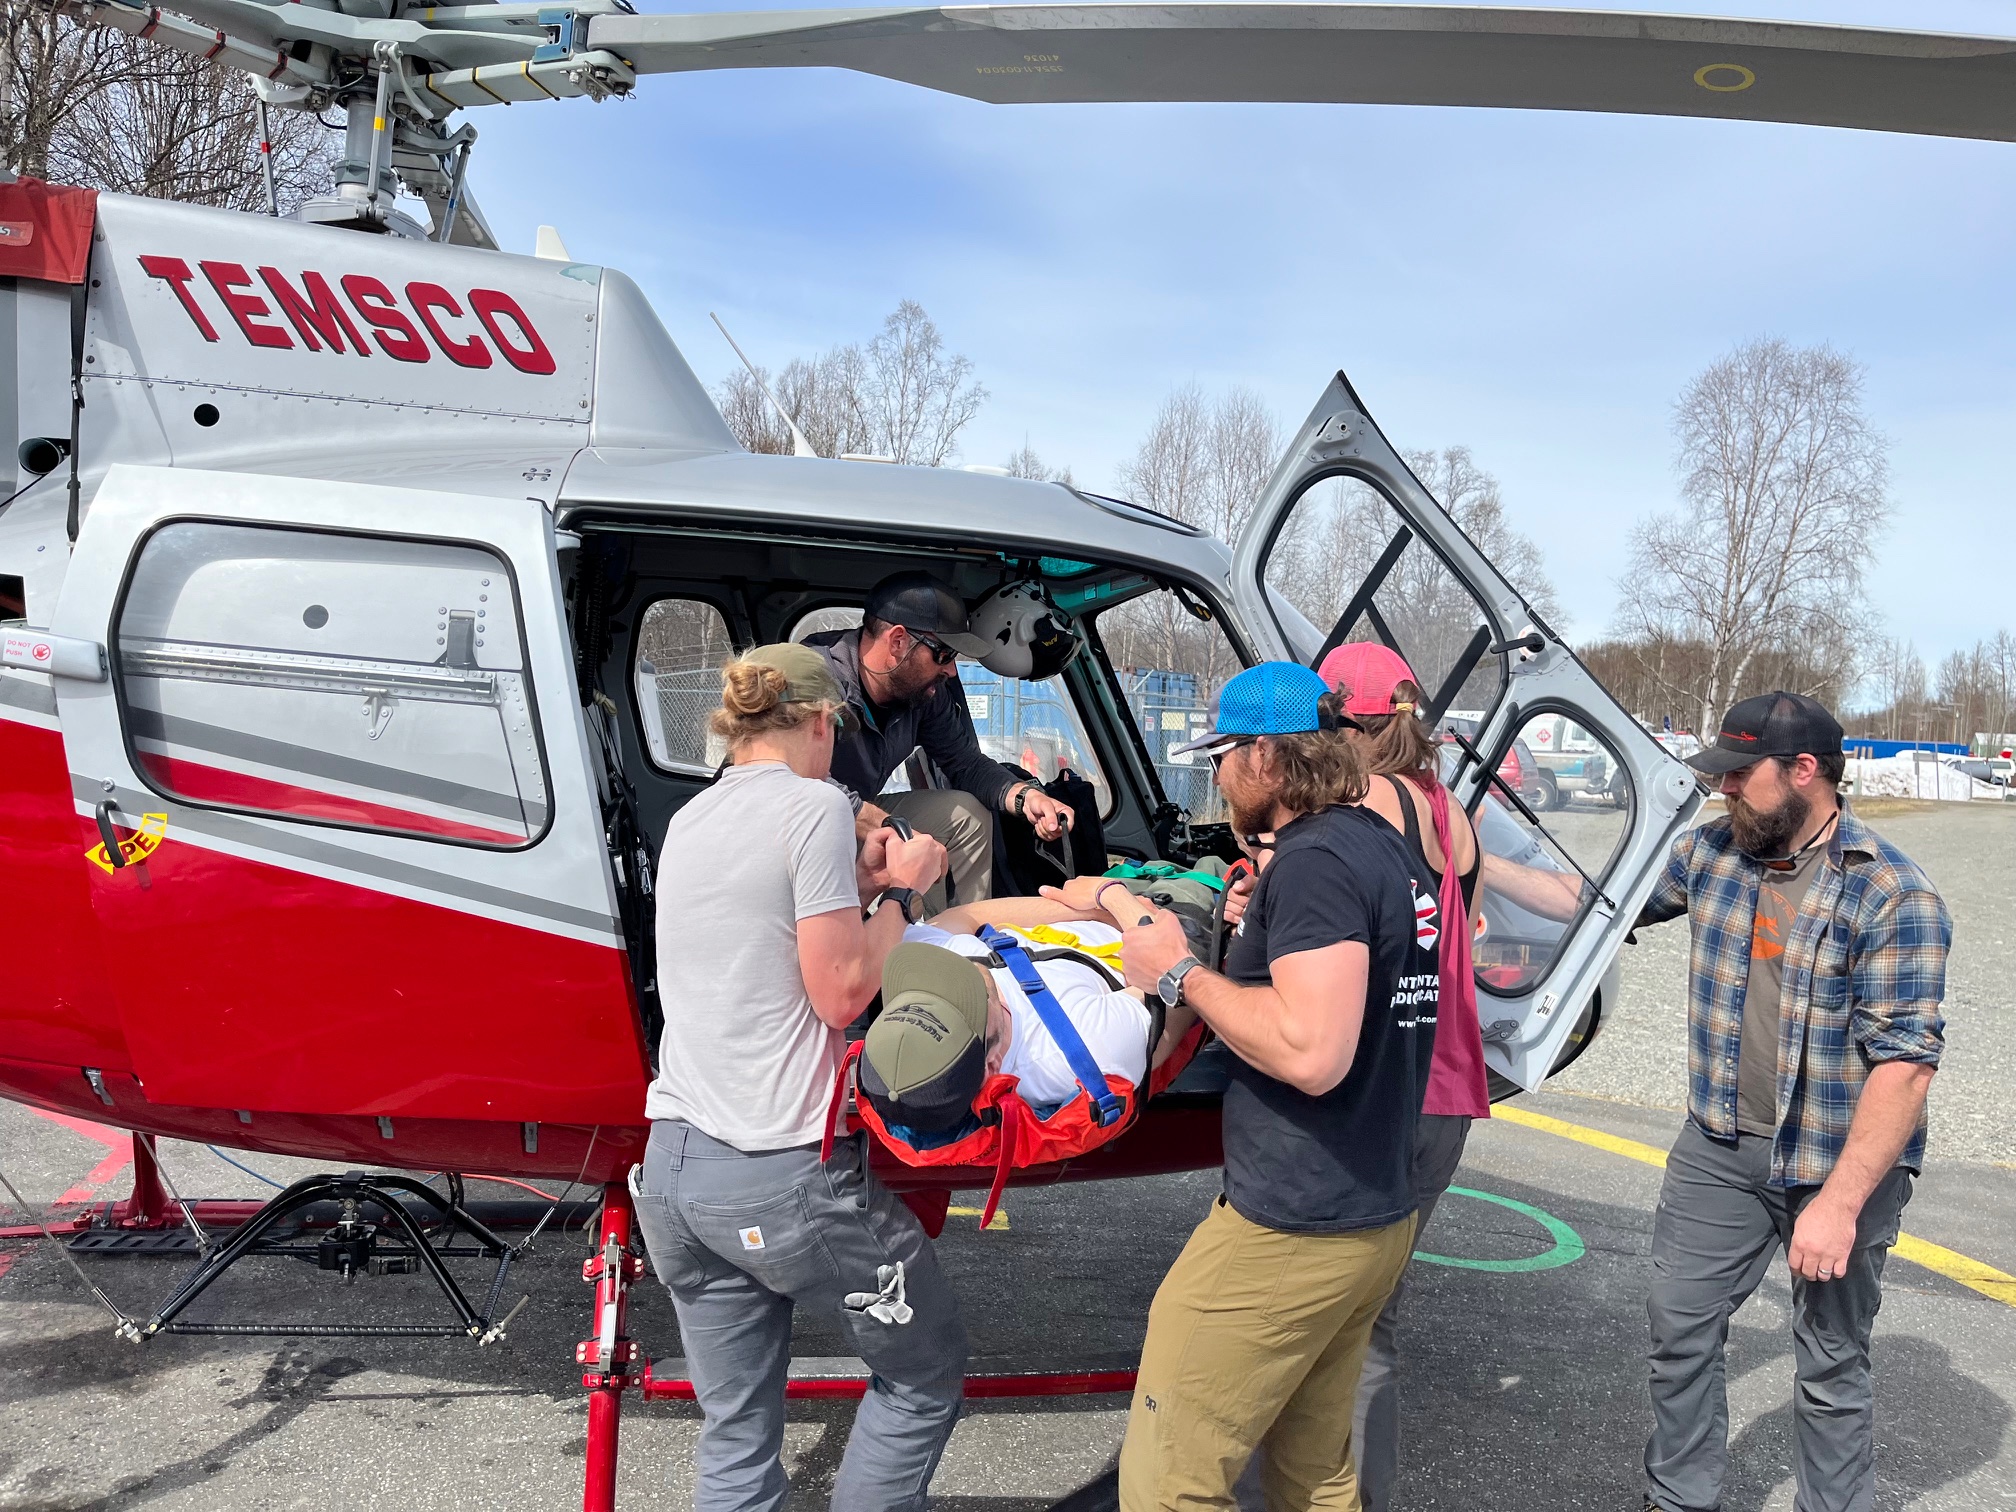 Multiple climbers load a patient strapped into a rescue litter into an open helicopter